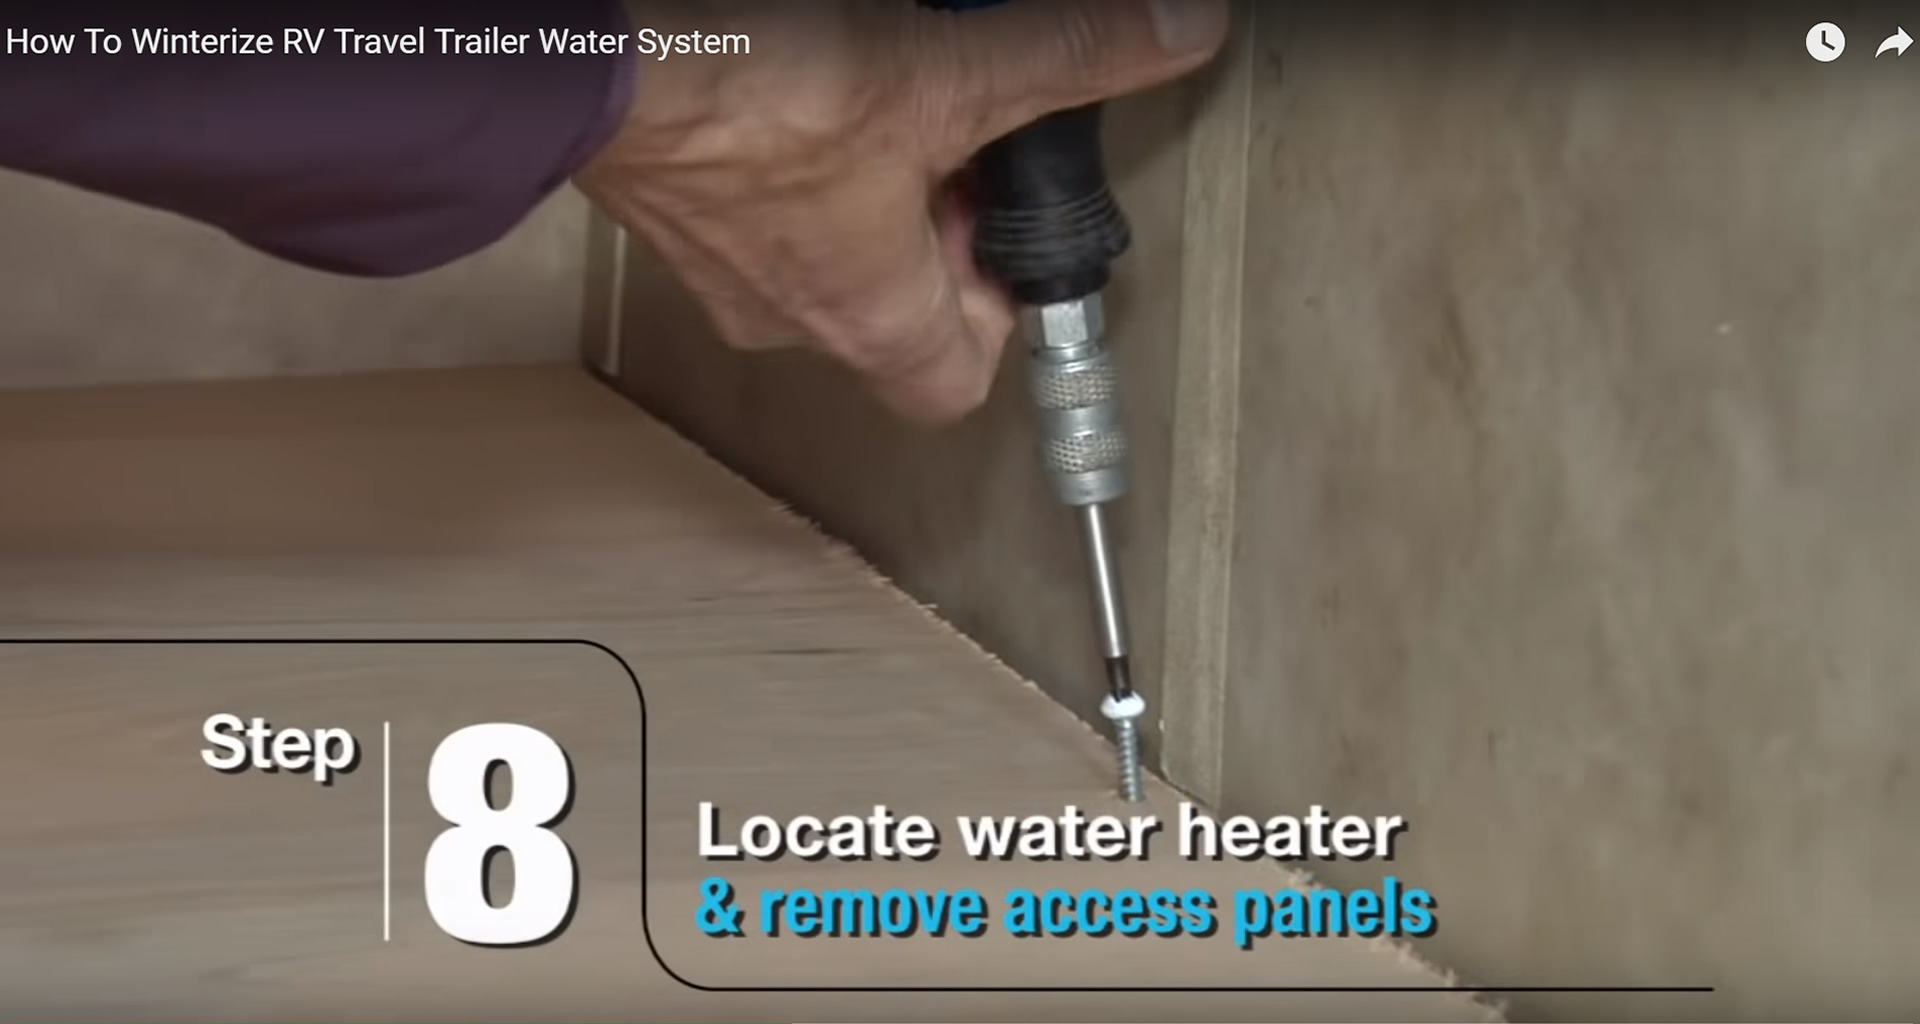 16 Steps - How to Winterize Your RV Travel Trailer - Step 8